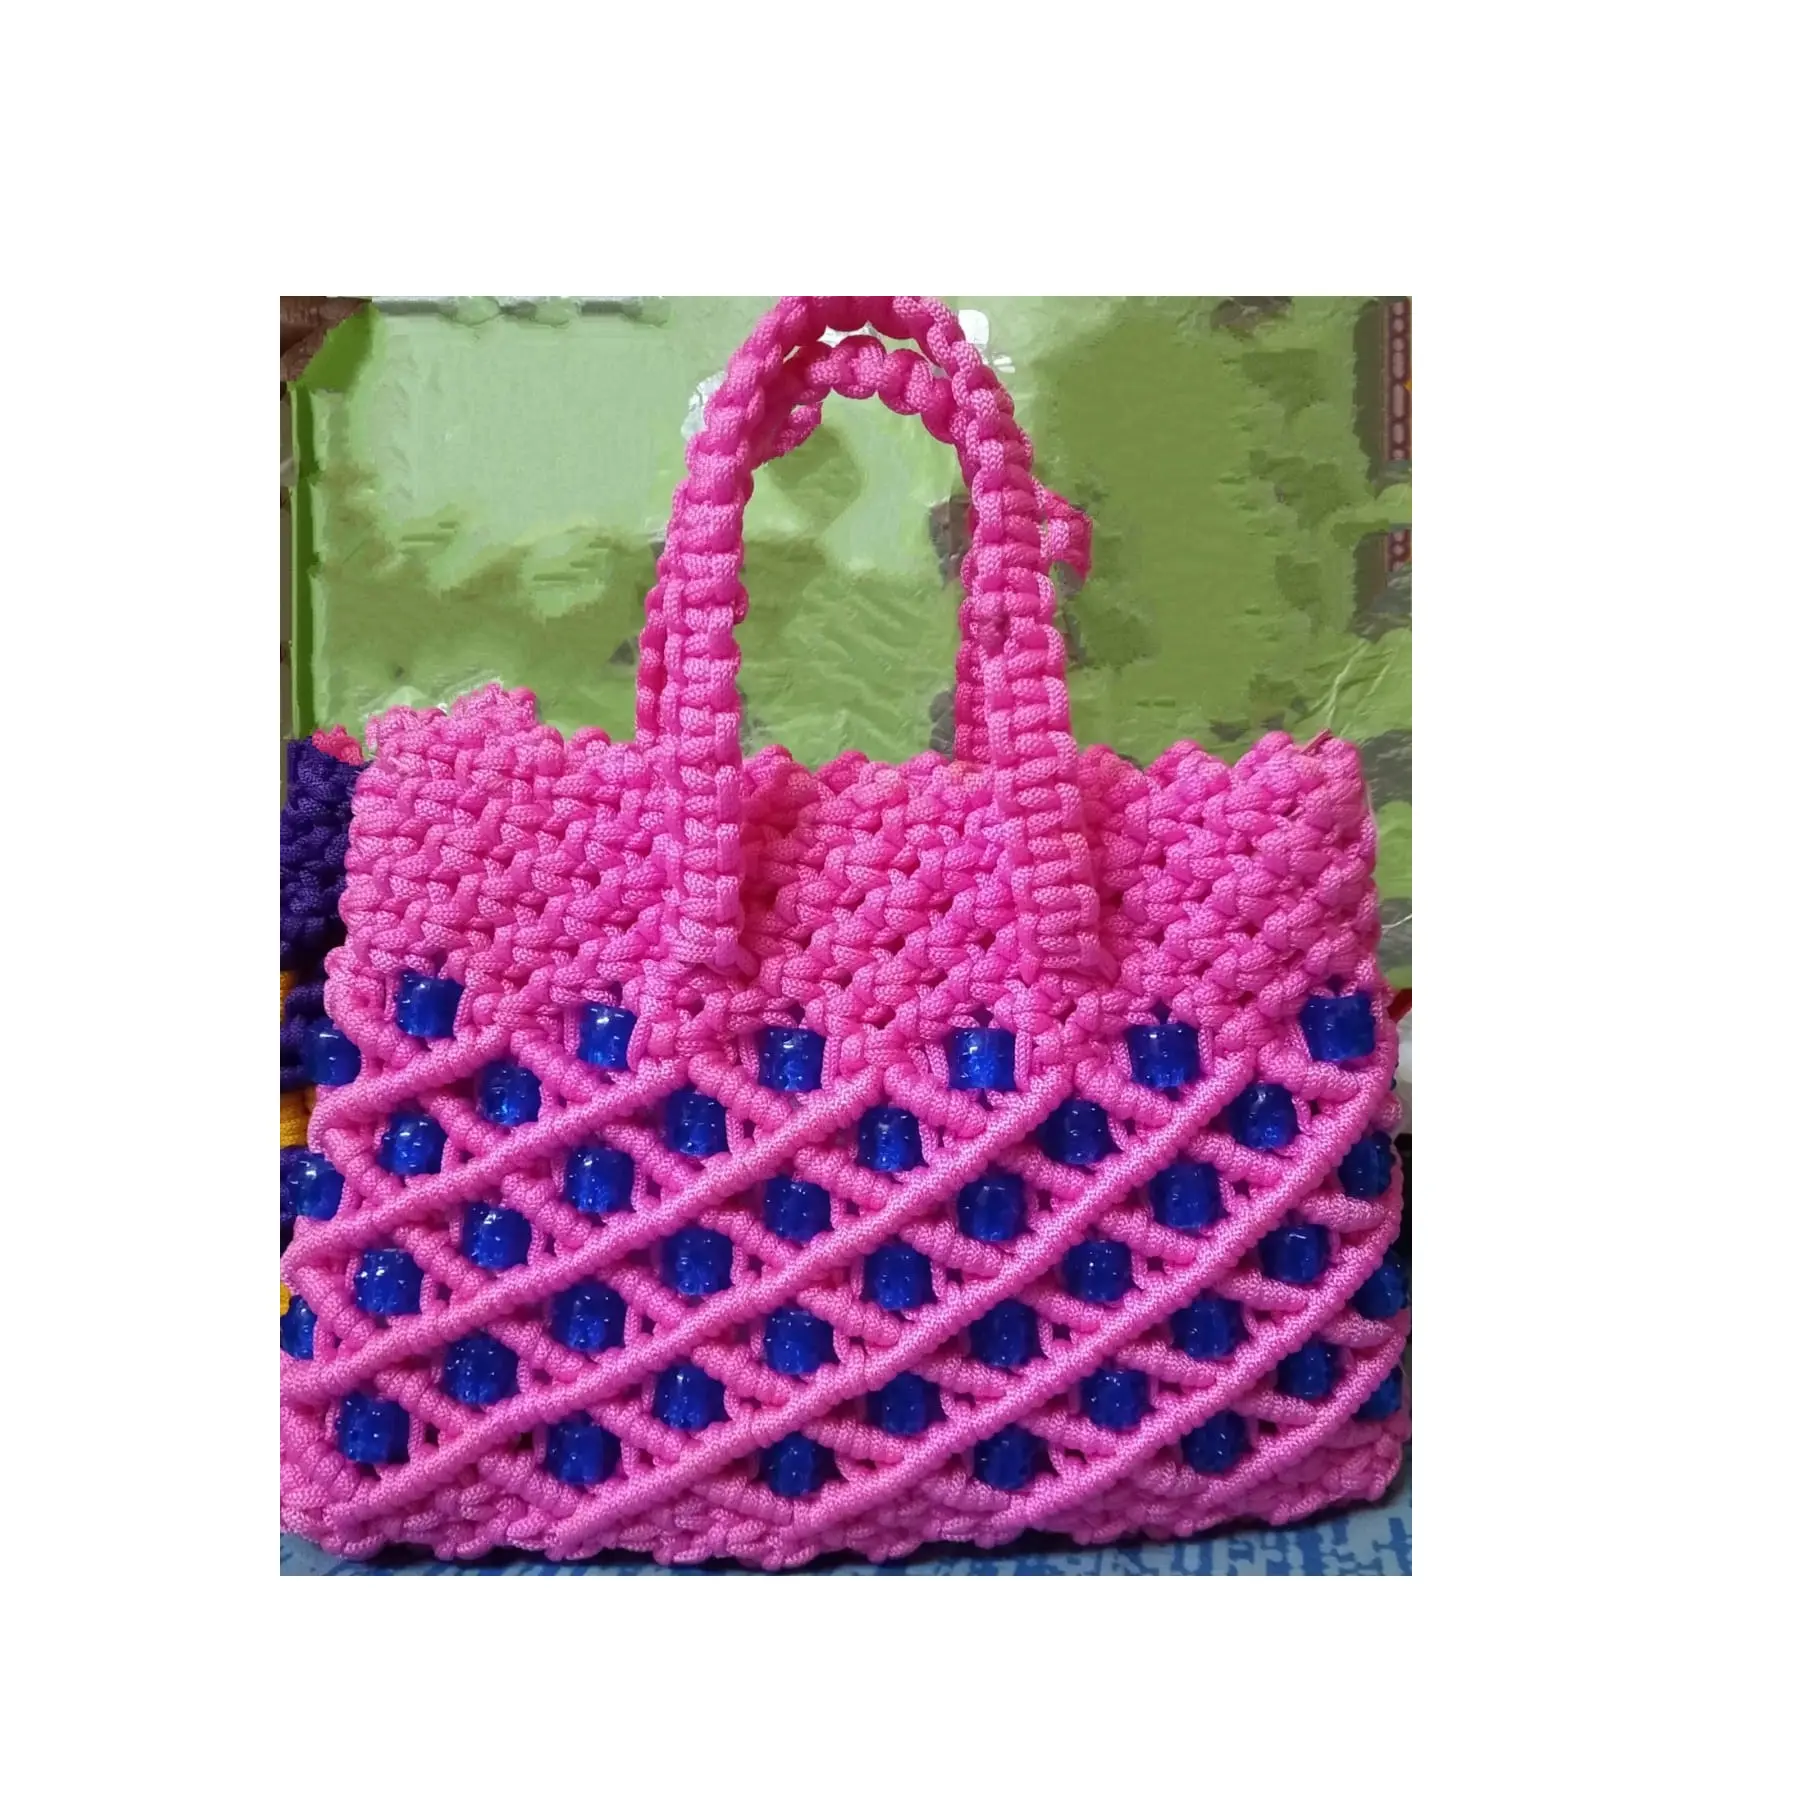 Wholesale Macrame Handbag Shopping Shoulder Female Daily Casual Foldaway Travel Colorful Tote Bag At Lowest Price